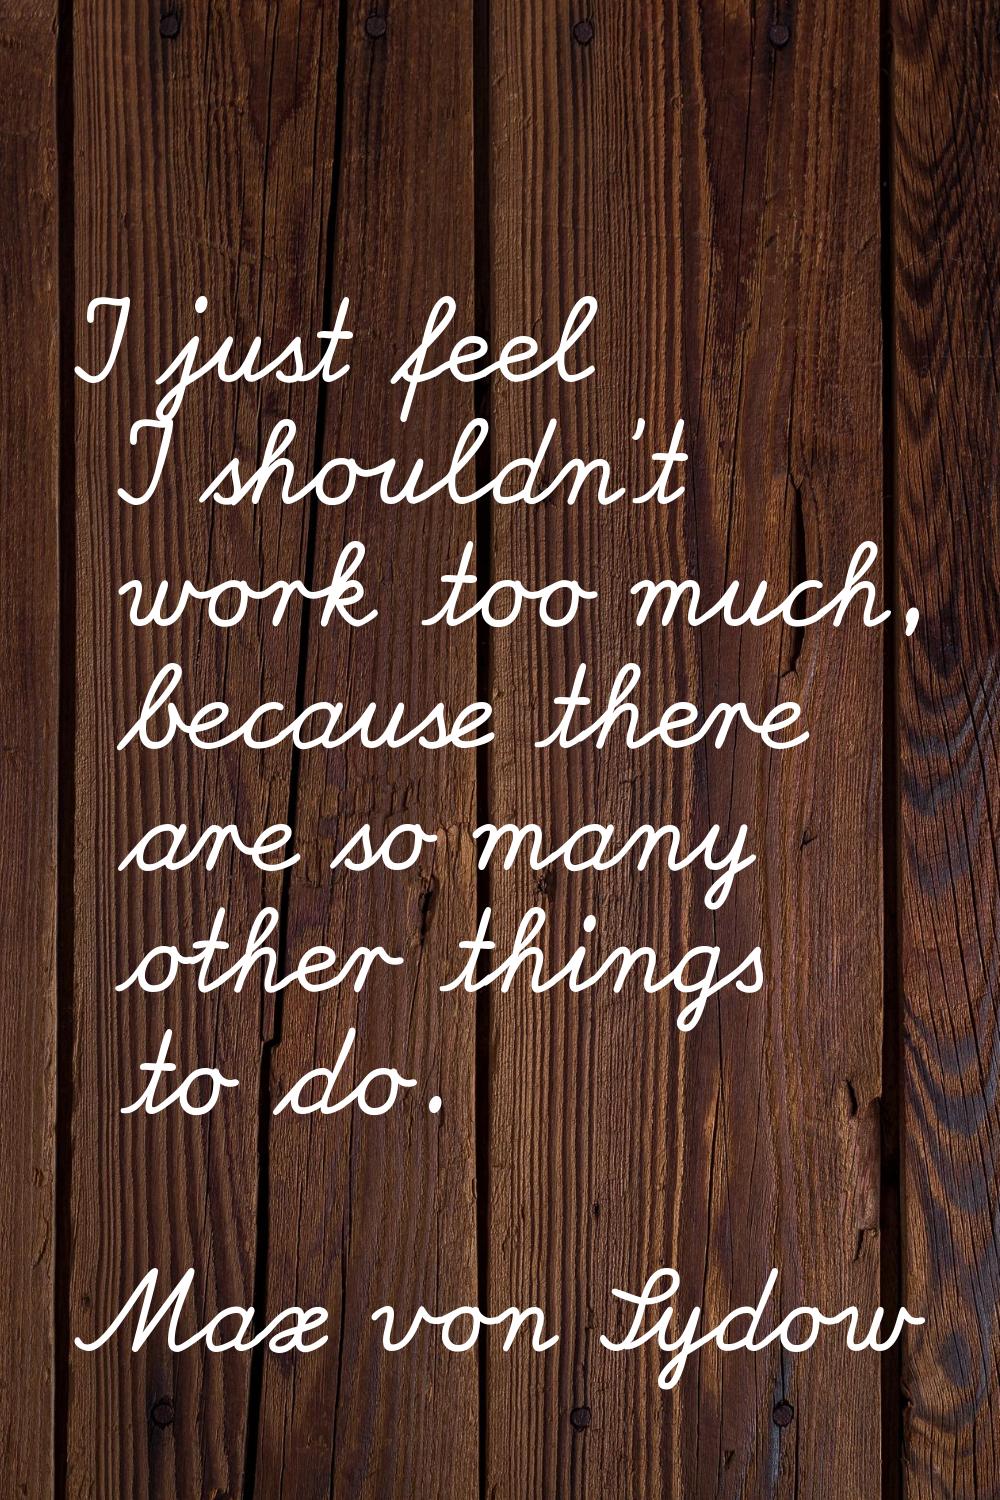 I just feel I shouldn't work too much, because there are so many other things to do.